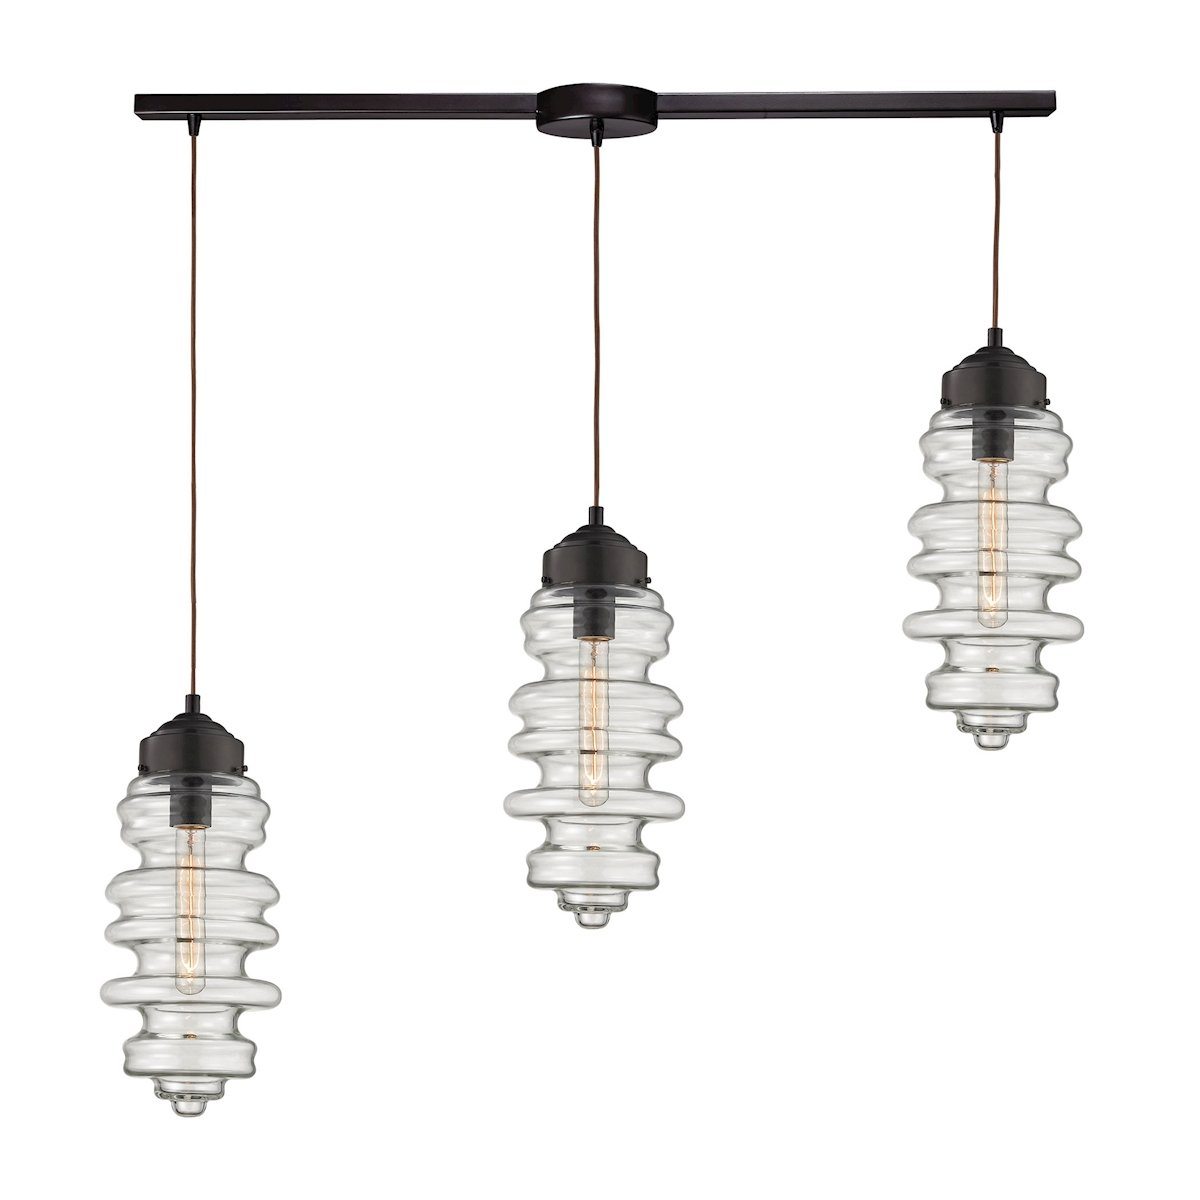 Cipher 3 Light Pendant In Oil Rubbed Bronze And Clear Glass Ceiling Elk Lighting 